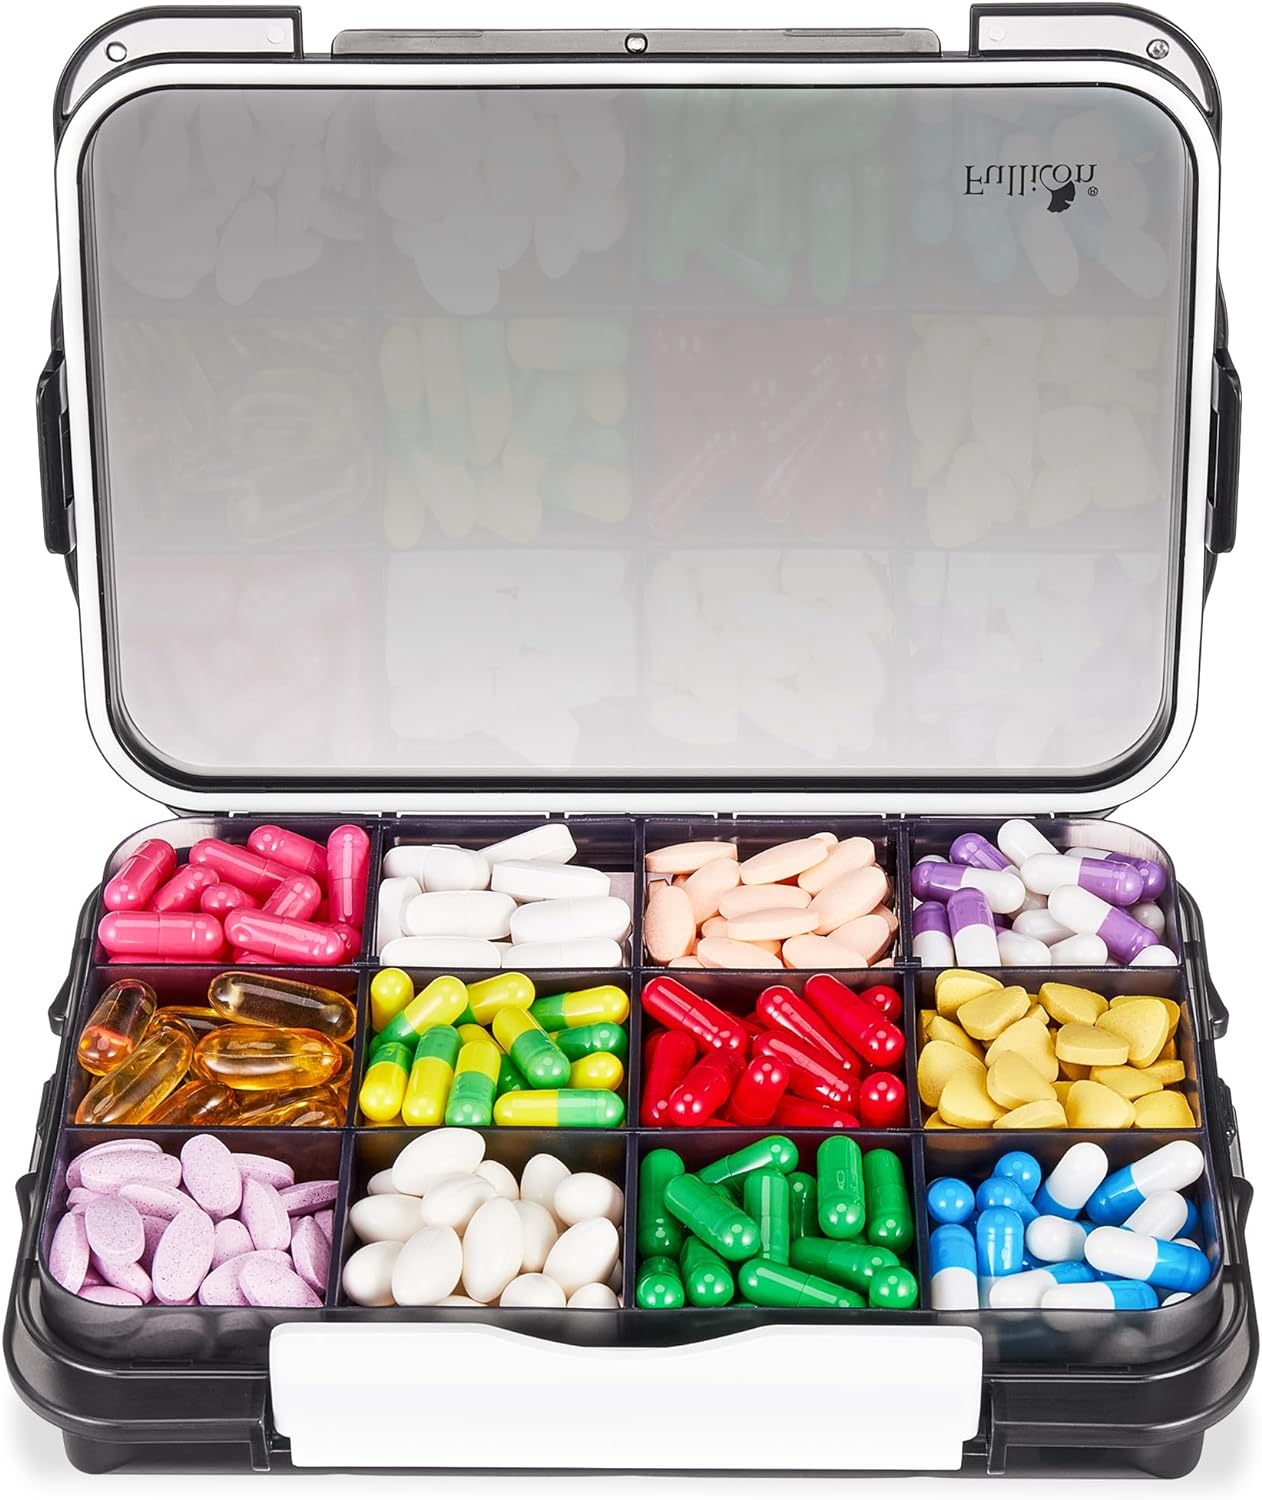 This holder is better than I expected. It is very sturdy yet easy to open. I have plenty of room for all my pills with extra room for things like aspirin, etc. The lid prevents the pills from mixing so I won't have to worry when I put it in my luggage.